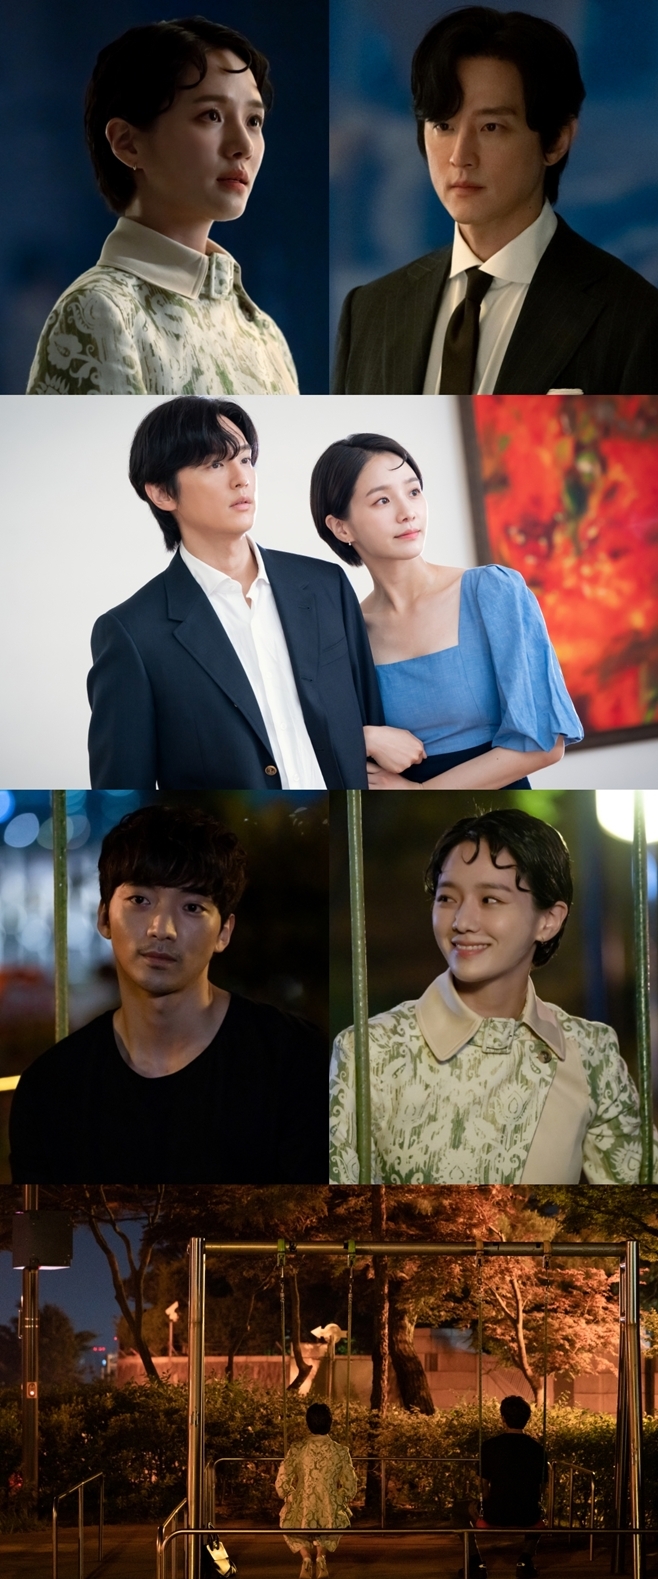 With Park Gyoo-yeong, Dari and Gamja-tang, showing his sincerity toward Kim Min-jae with a surprise kiss, the future movements of two Wishing to Run, Kwon Yul and Hwang Hui, are drawing attention.KBS2s Drama Dali and Gamja-tang (playplayed by Son Eun-hye and director Lee Jung-seop) released SteelSeries on the 14th, which includes two shots of Park Gyoo-yeong, Kwon Yul, and Hwang Hui.In the 7th episode of Dali and Gamja-tang, which aired on the 13th, Taejin also supported Dali by delaying his overseas business trips to perform the first exhibition since he took over as director.In addition, Tae-jin suggested that he would solve the debts of the chefsong to clean up the Muhak (Kim Min-jae), which was hanging around the side, and when Muhak refused, he had a sparking nervous battle.Unlike Tae-jins interest and affection, Dali was focused on Muhak, who was frozen when he saw Muhak with Sa-ji (Yon-woo).Also, during the late night of Muhaks past, he made a surprise kiss for him.Like Muhak, the process of growing the mind toward Muhak is drawing interestingly.SteelSeries, which was released in the meantime, contained a scene where Dali faced Taejin with a cold expression of the world.It raises curiosity about why Dali made such a cool look to Taejin, who claimed to be the Kidarija.In addition, Dali and Taejins past SteelSeries have been unveiled together, and now they are two people in an uncomfortable relationship, but in the past they are as friendly and happy as any couple.It is attracting attention as to why the past and present of the two people have changed so sharply.They look comfortable and fond when theyre with their old friend, the roundtable, and the two of them sit side by side on the swing in the middle of the night.In addition, the world running with a comfortable smile and enjoying healing time, the future relationship of the two people also raises questions.Roundtables are a strong support you can call when its difficult to run. Running without a place to go is currently in the rooftop room of the roundtable.In the last 7 episodes, the roundtable noticed the relationship between Dali and the owner Muhak, and Muhak was also jealous of the existence of the roundtable.The roundtable, which has hidden its mind toward Dali, is wondering whether it will reveal the feelings of Dary, which has been hidden since the existence of Muhak.As Dali and Muhak are getting closer, please check on the broadcast how the two men, Taejin and Roundtable, who only look at Dali, will react, said Dali and Gamja-tang.It aired at 9:30 p.m.